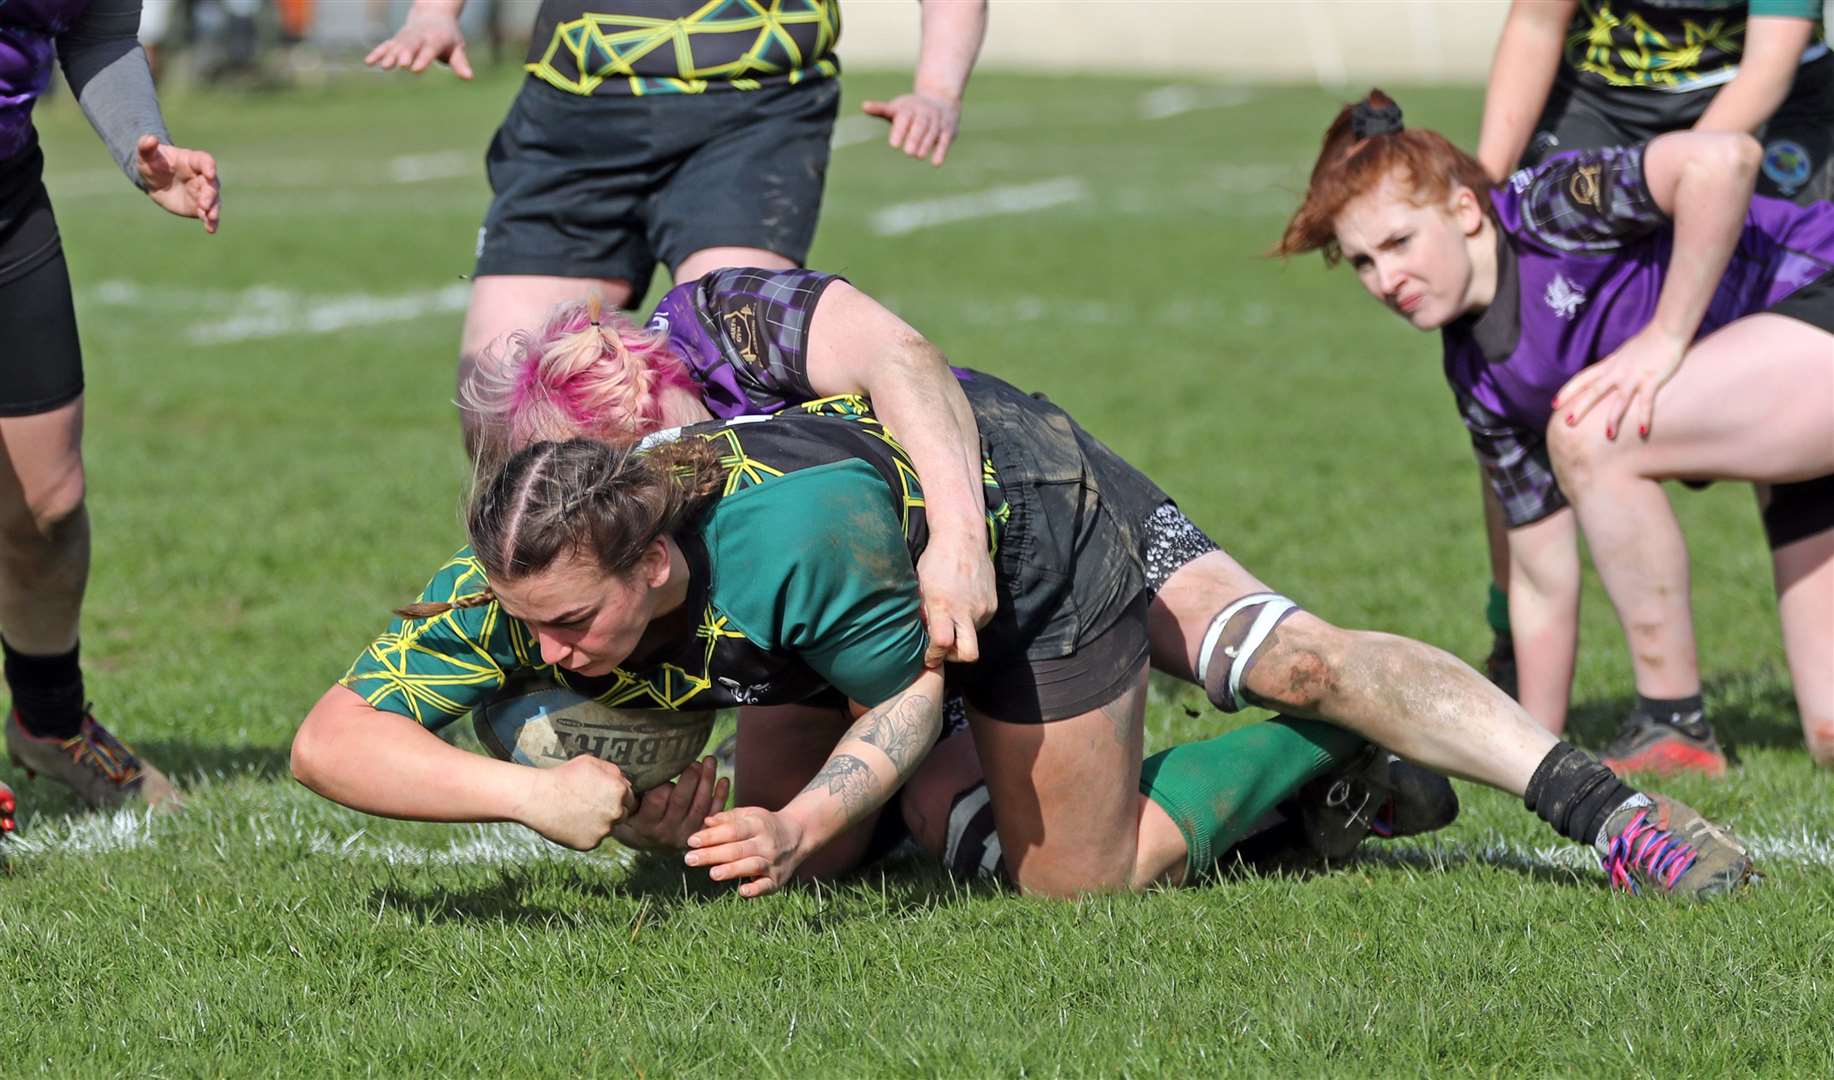 Emmy Smith touches down to score despite being tackled by a Strathmore player. Picture: James Gunn